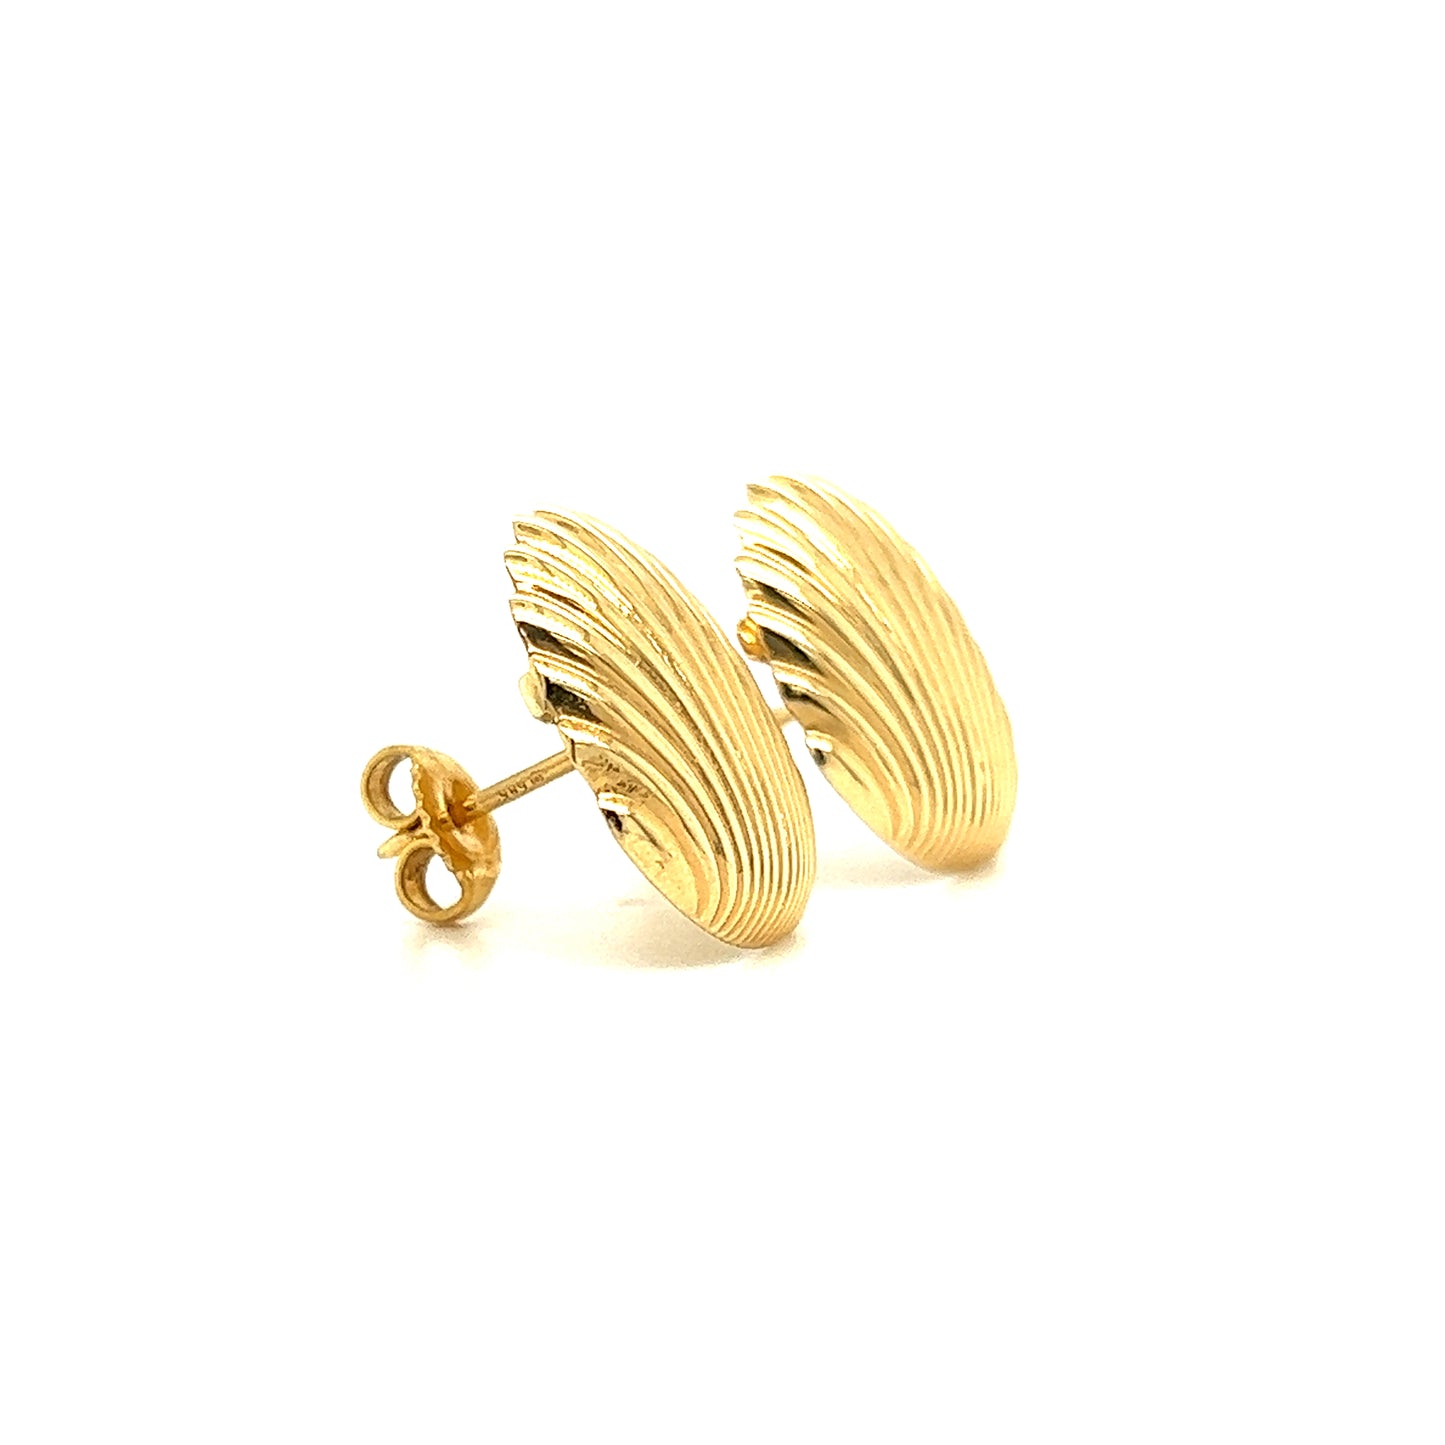 Scallop Post Earrings in 14K Yellow Gold Left Side View